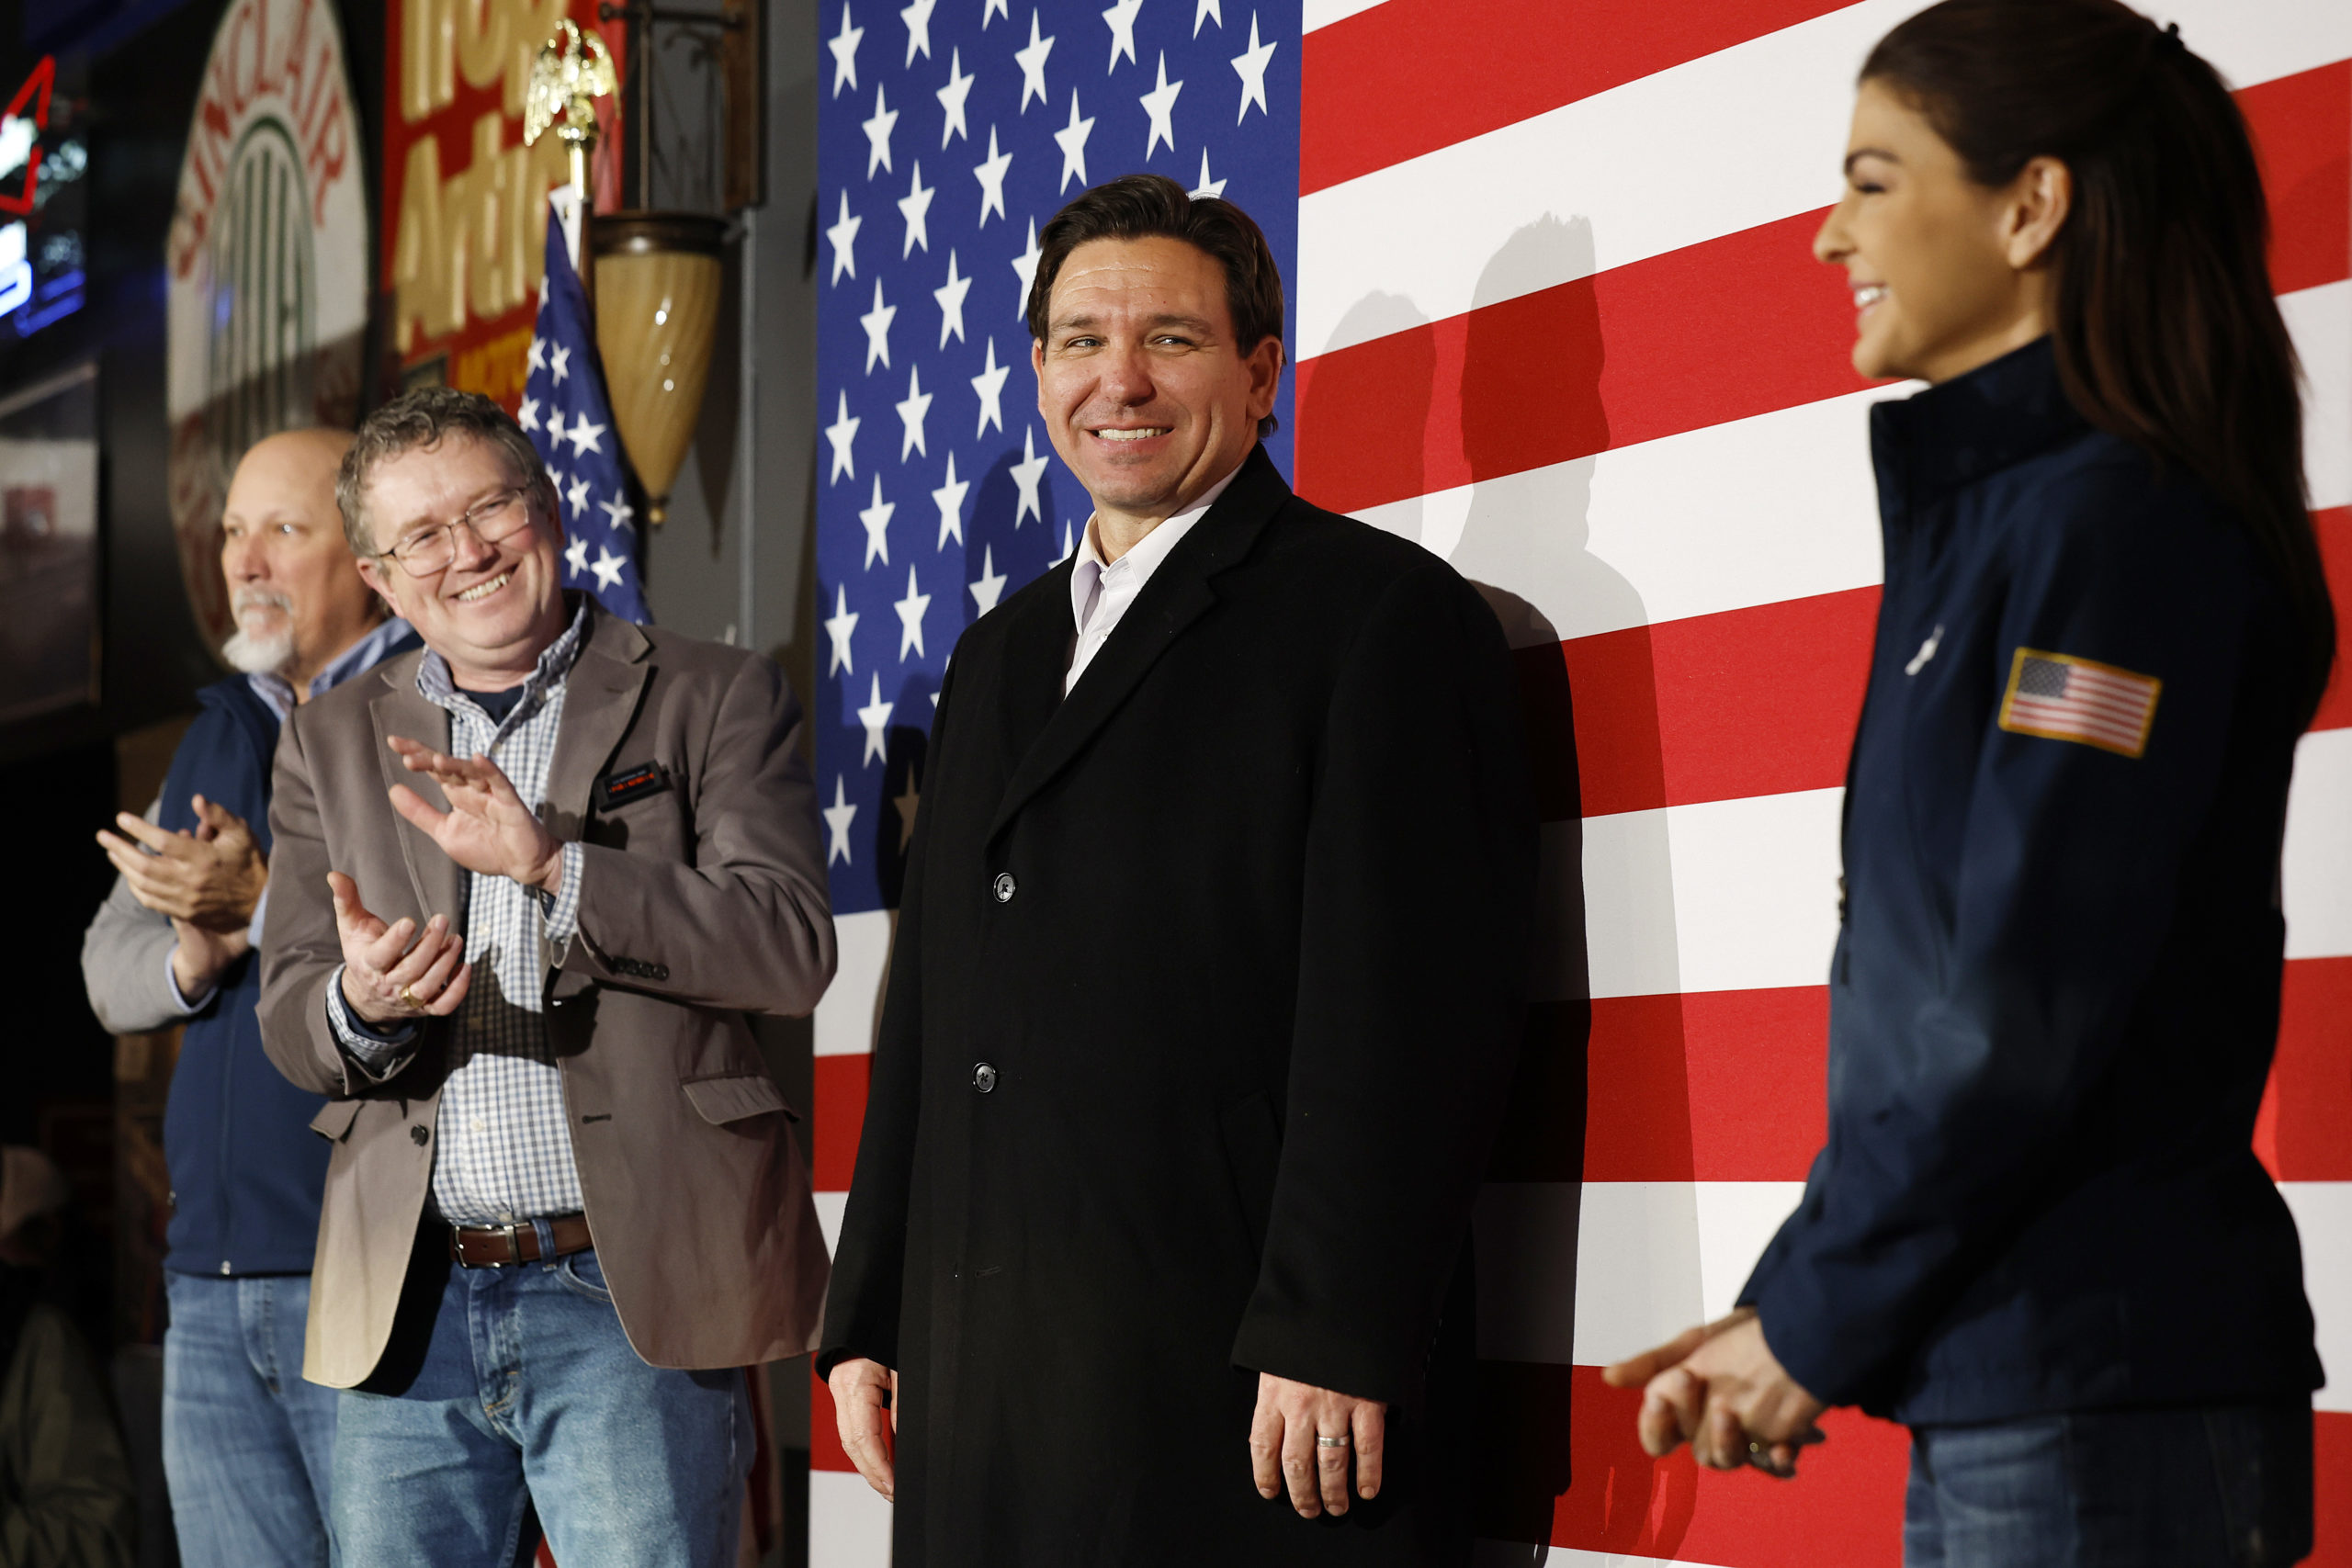 Republican presidential candidate Florida Gov. Ron DeSantis looks at his wife Casey DeSantis at a campaign event at the Chrome Horse Saloon as Rep. Chip Roy (R-TX) and Rep. Thomas Massie (R-KY) look on, January 14, 2024 in Cedar Rapids, Iowa. Iowa Republicans will be the first to select their party's nominee for the 2024 presidential race when they go to caucus tomorrow. (Photo by Chip Somodevilla/Getty Images)